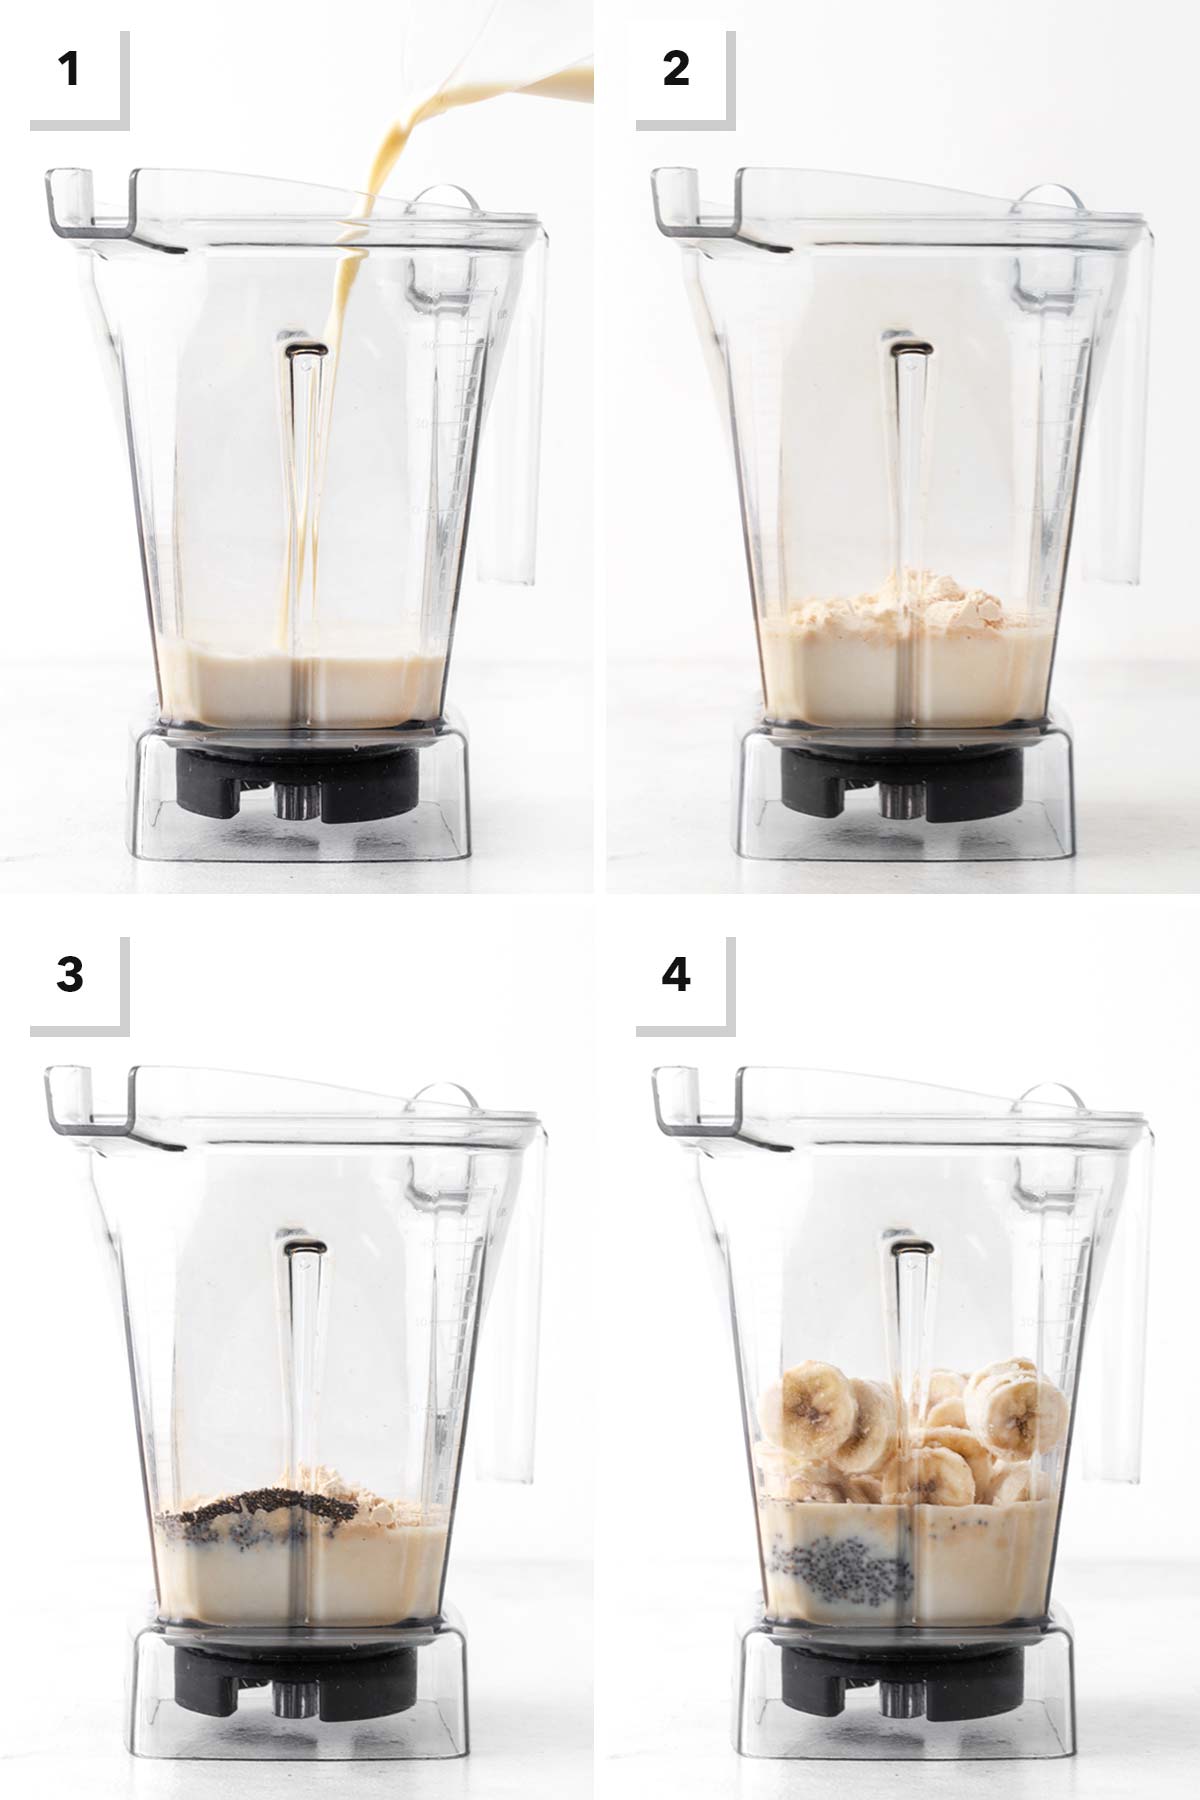 Steps for making a banana protein smoothie.